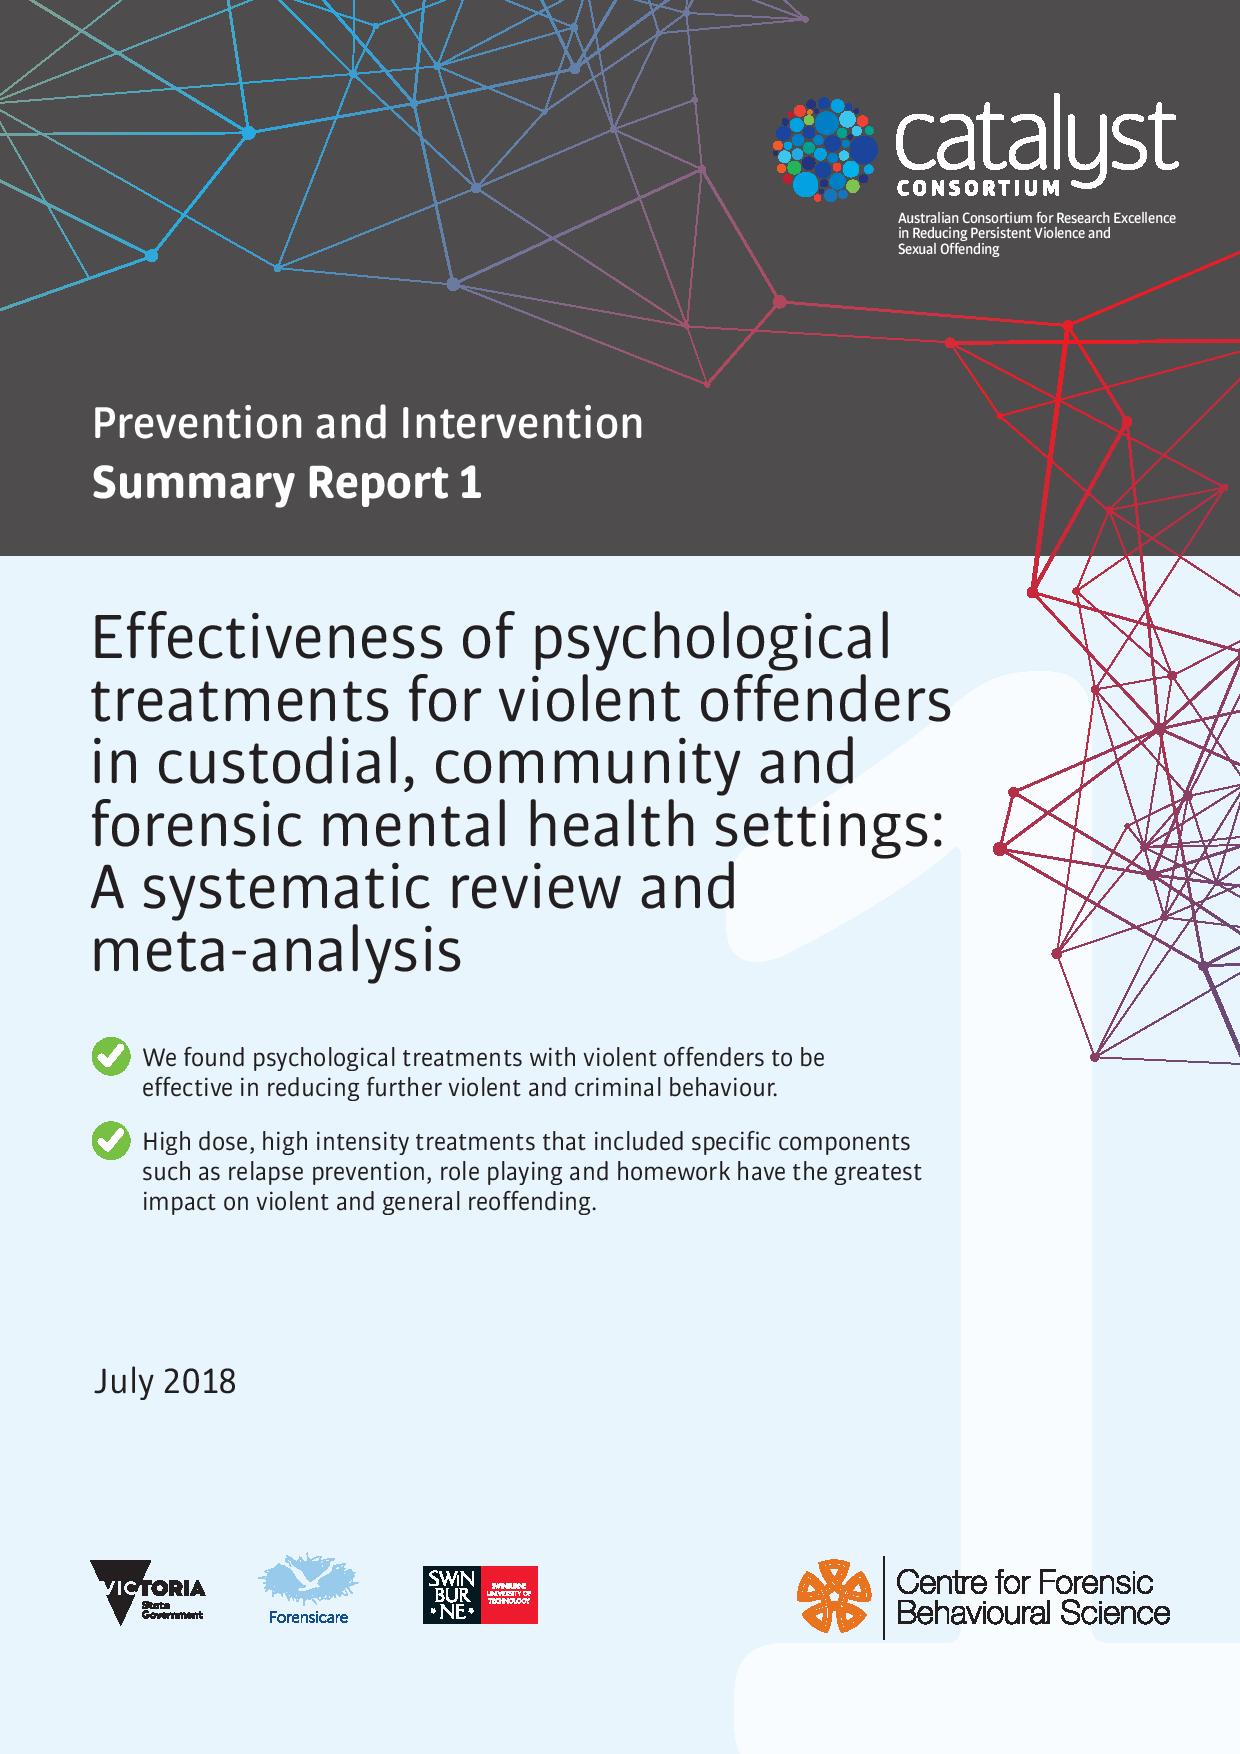 Effectiveness of psychological treatments for violent offenders in custodial, community and forensic mental health settings: A systematic review and meta-analysis